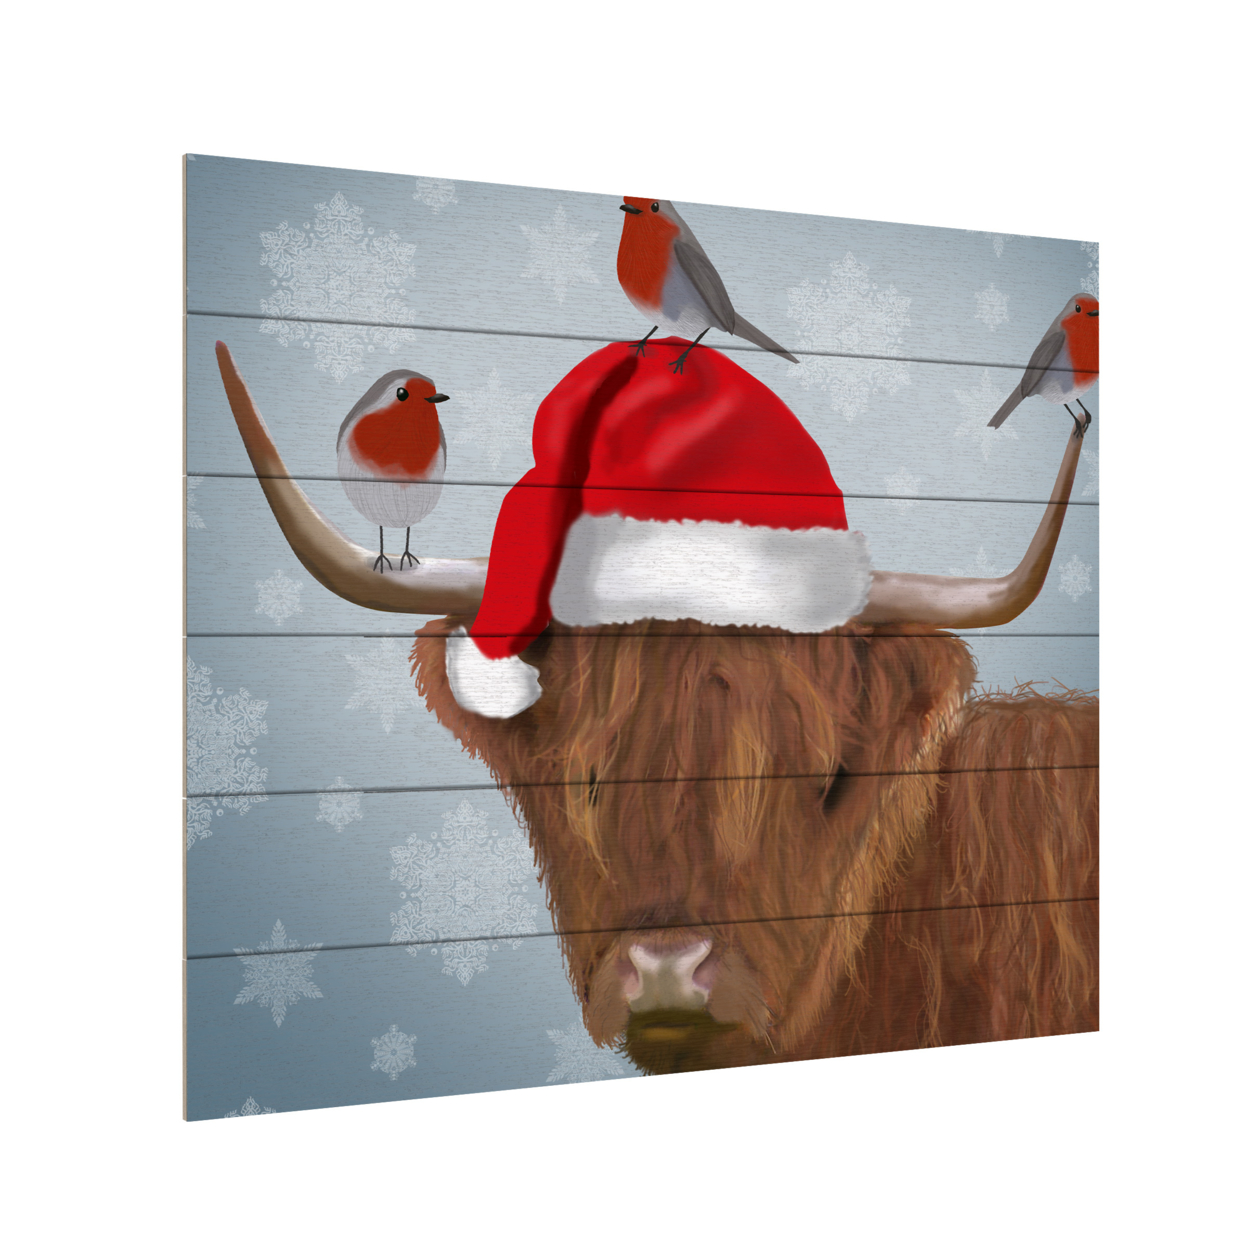 Wooden Slat Art 18 X 22 Inches Titled Highland Cow And Robins Ready To Hang Home Decor Picture